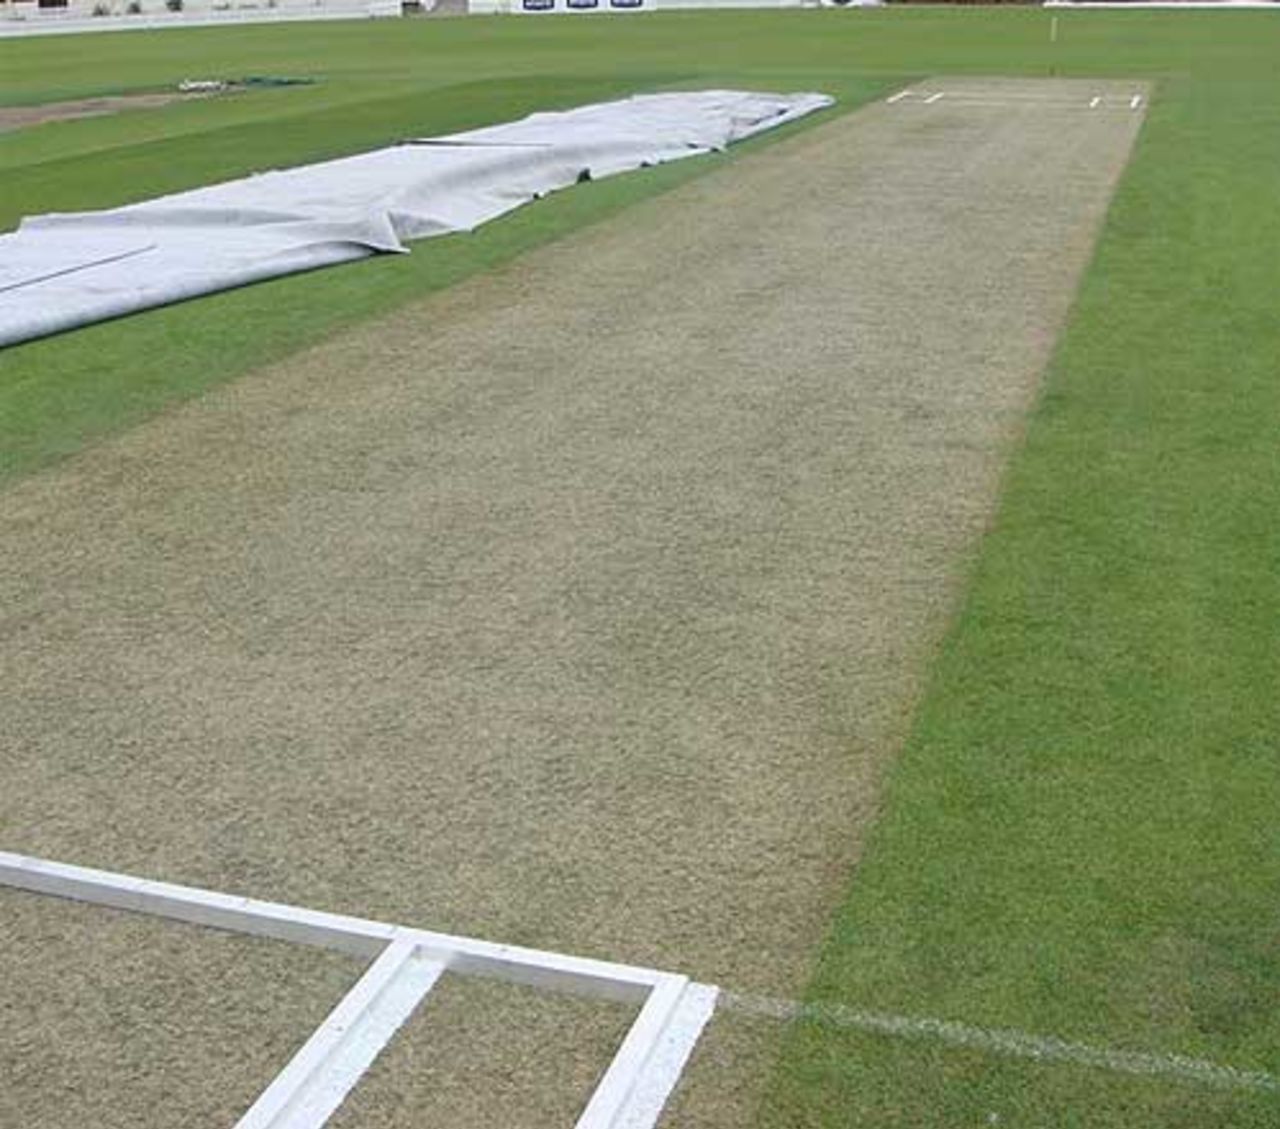 The pitch at Seddon Park to be used for the warm-up match between Northern Districts and Bangaldeshis, Hamilton, December 15, 2007